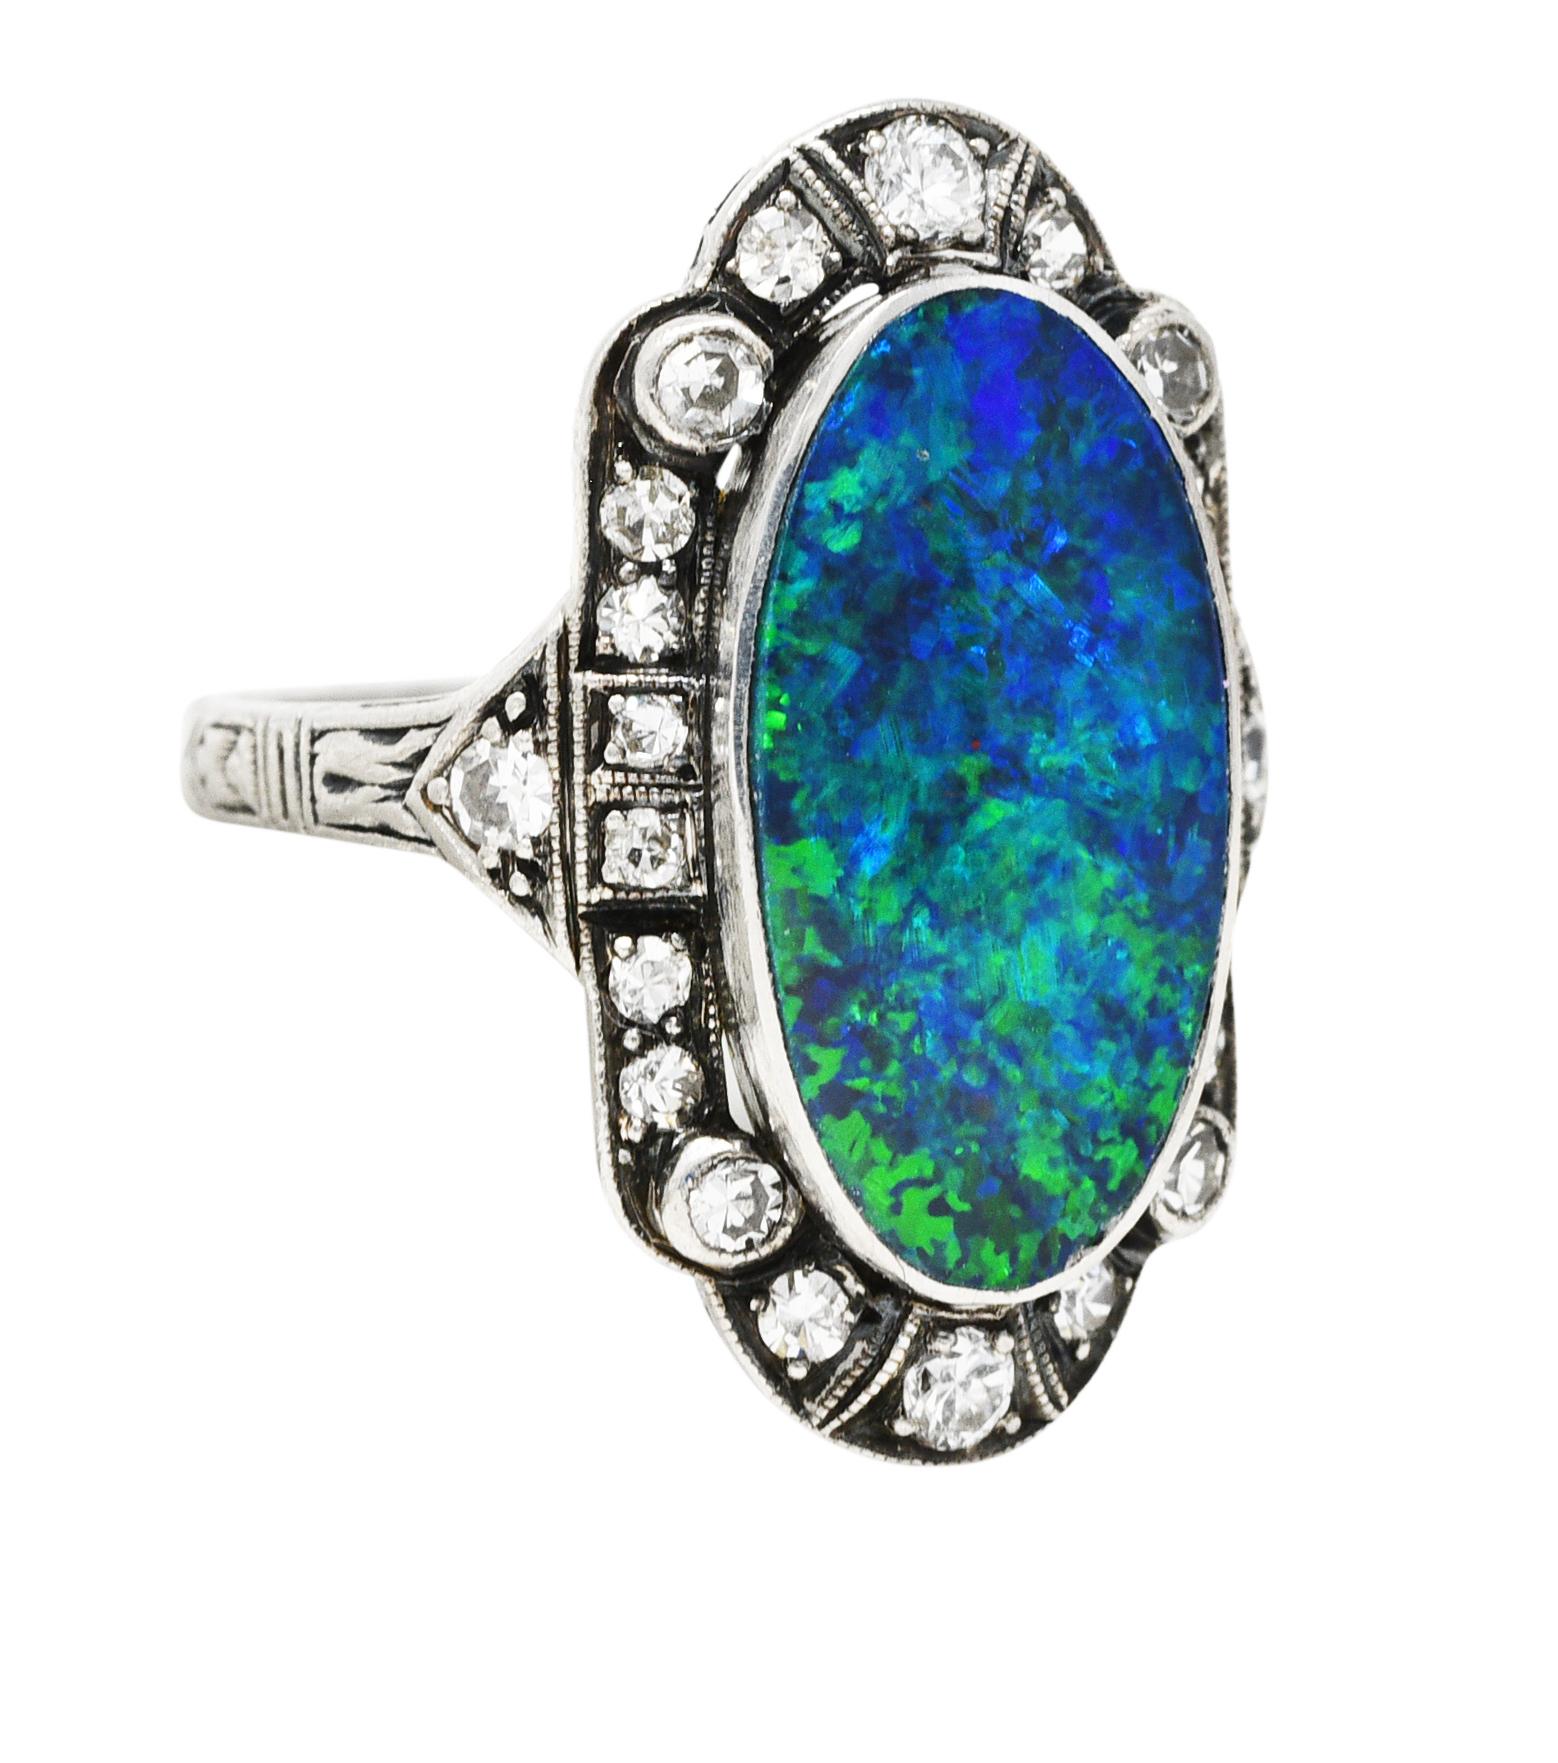 Centering a bezel set oval shaped opal tablet measuring 8.7 x 17.7 mm. Opaque black in body color with strong blue/green play-of-color. With a recessed milgrain surround featuring single cut diamonds. Bead set and weighing approximately 0.32 carat